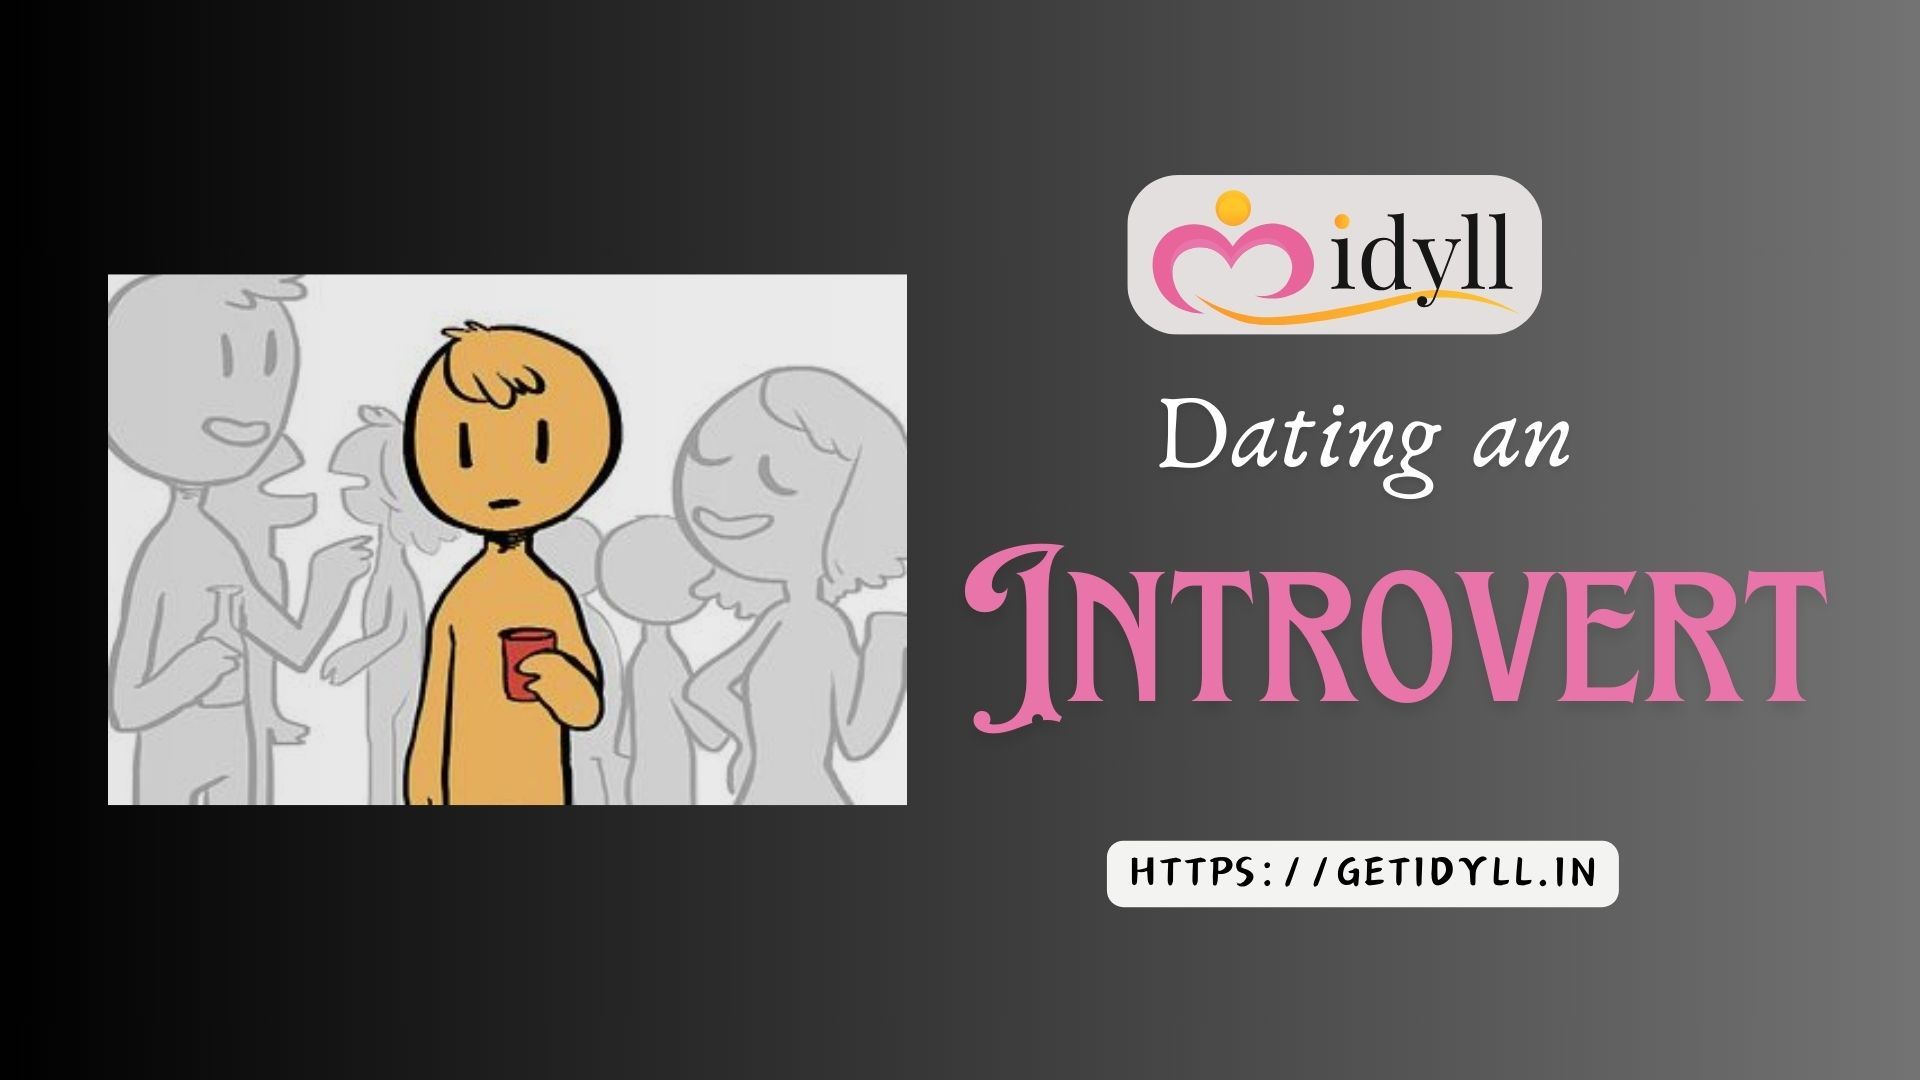 dating an introvert, love, dating, relationship, idyll, idyll dating, dating app